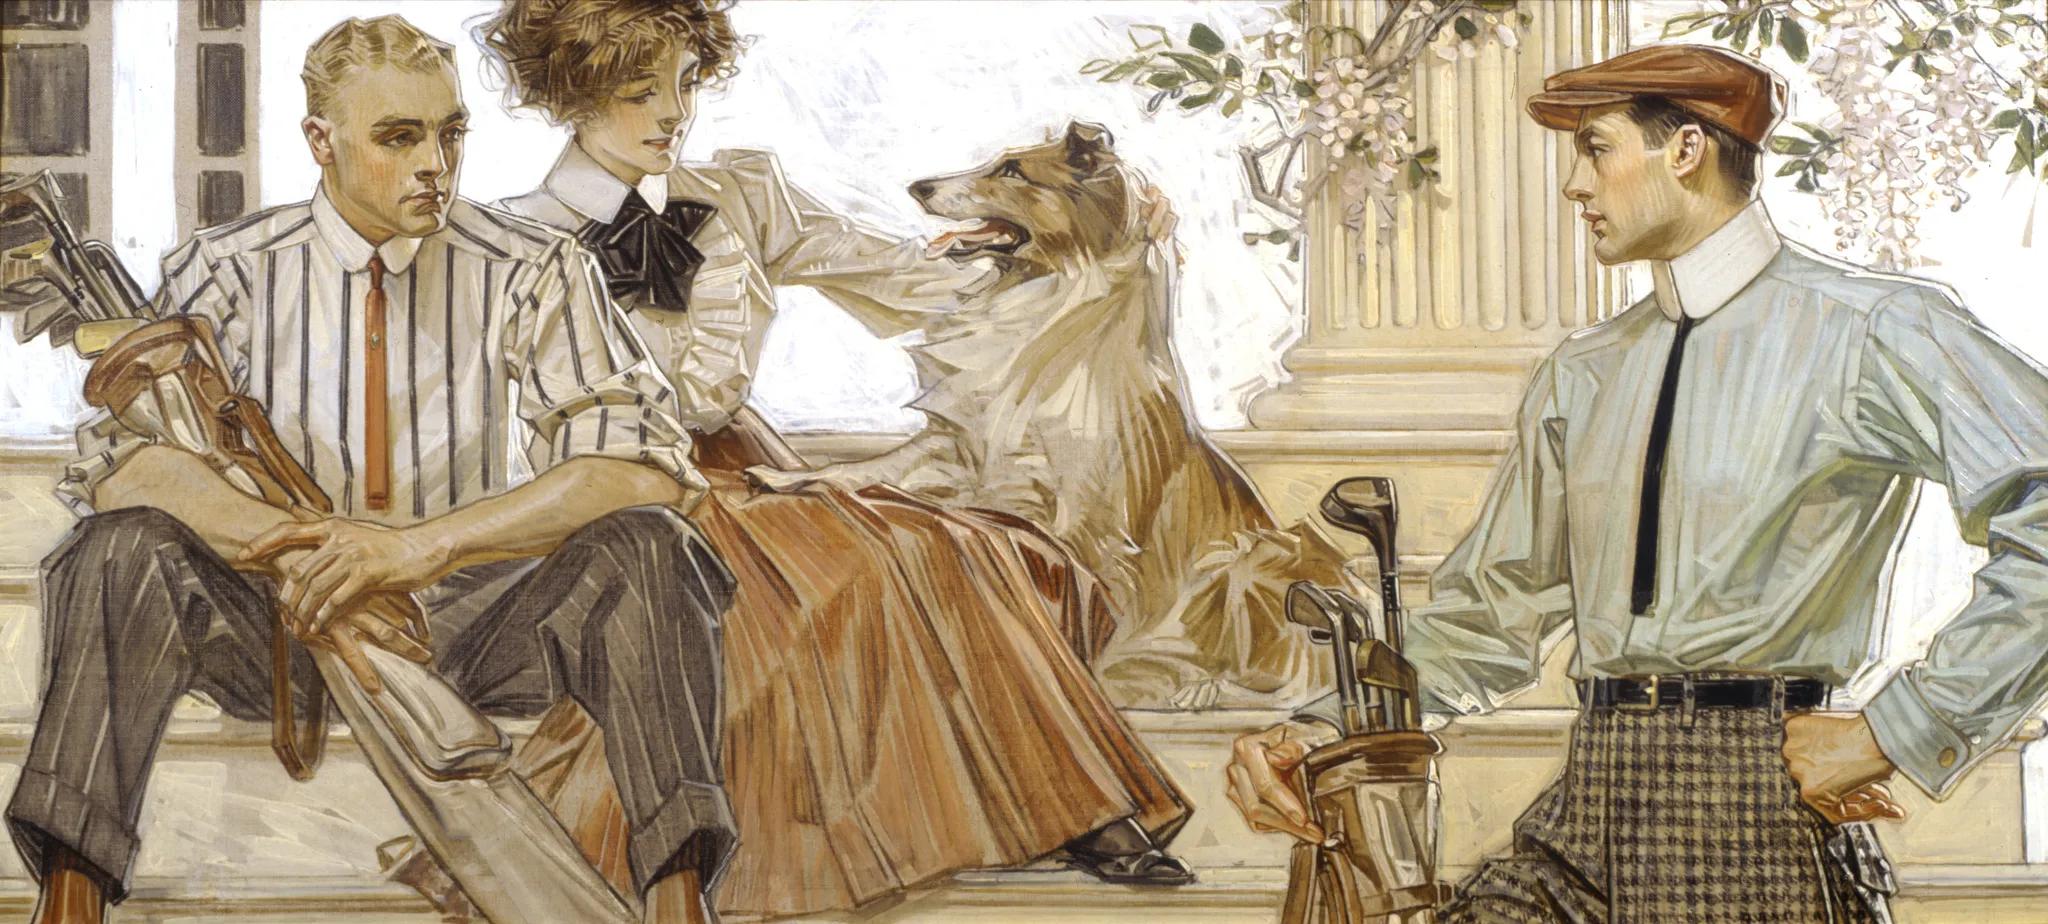 With Collie, J.C. Leyendecker, oil and turpentine on canva, 1910.jpg